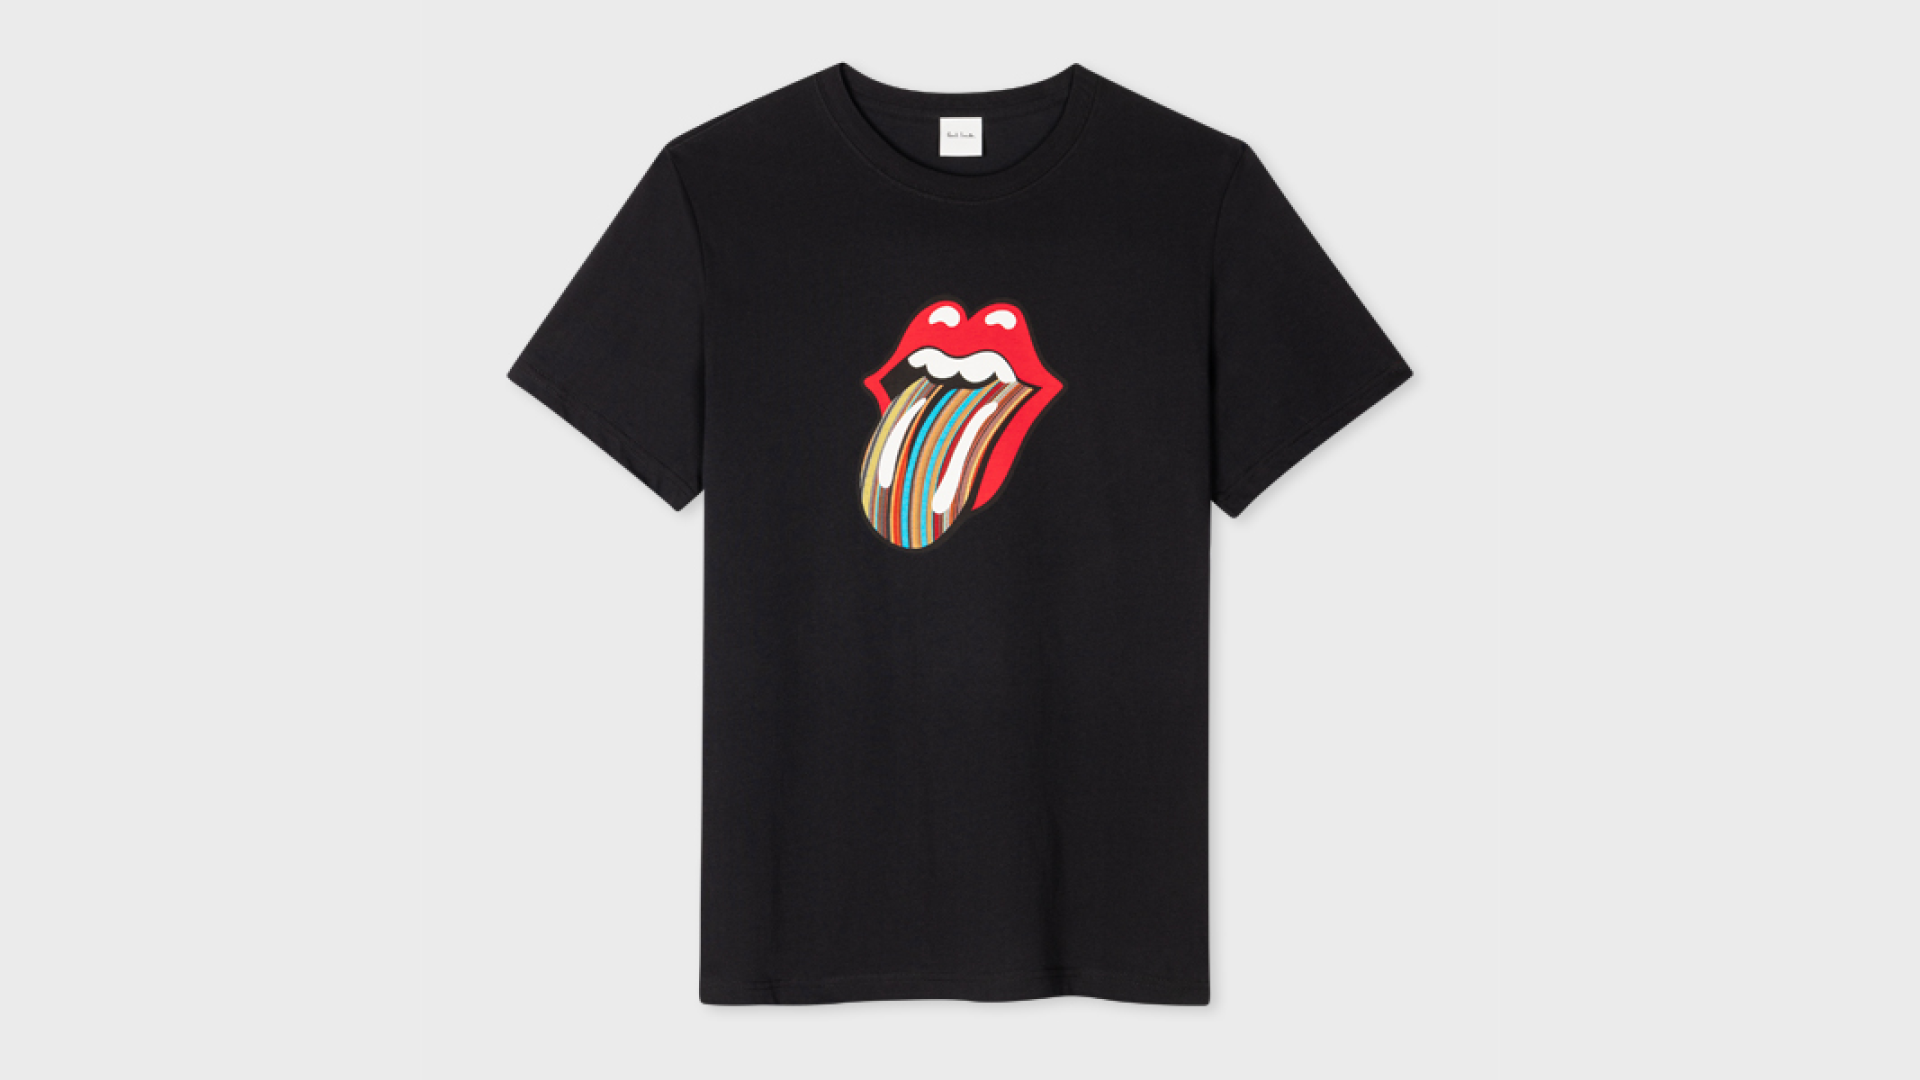 Paul Smith Teams Up with The Rolling Stones on Exclusive 'Hackney ...